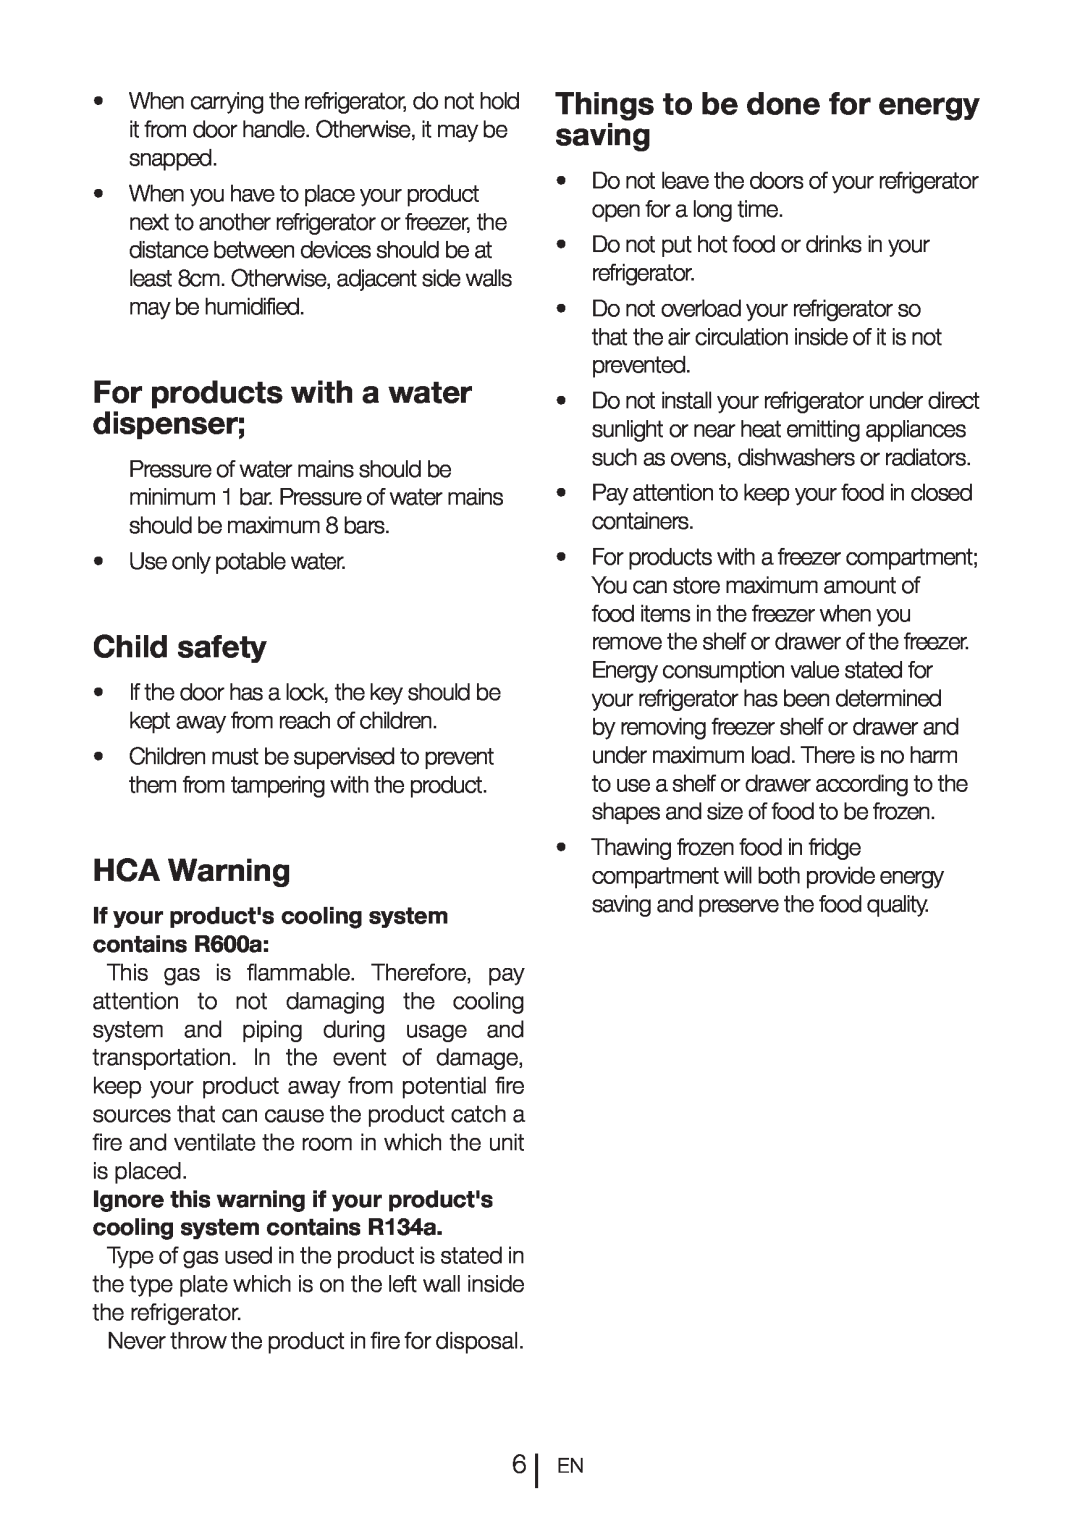 Blomberg DND 9977 PD For products with a water dispenser, Child safety, HCA Warning, Things to be done for energy saving 